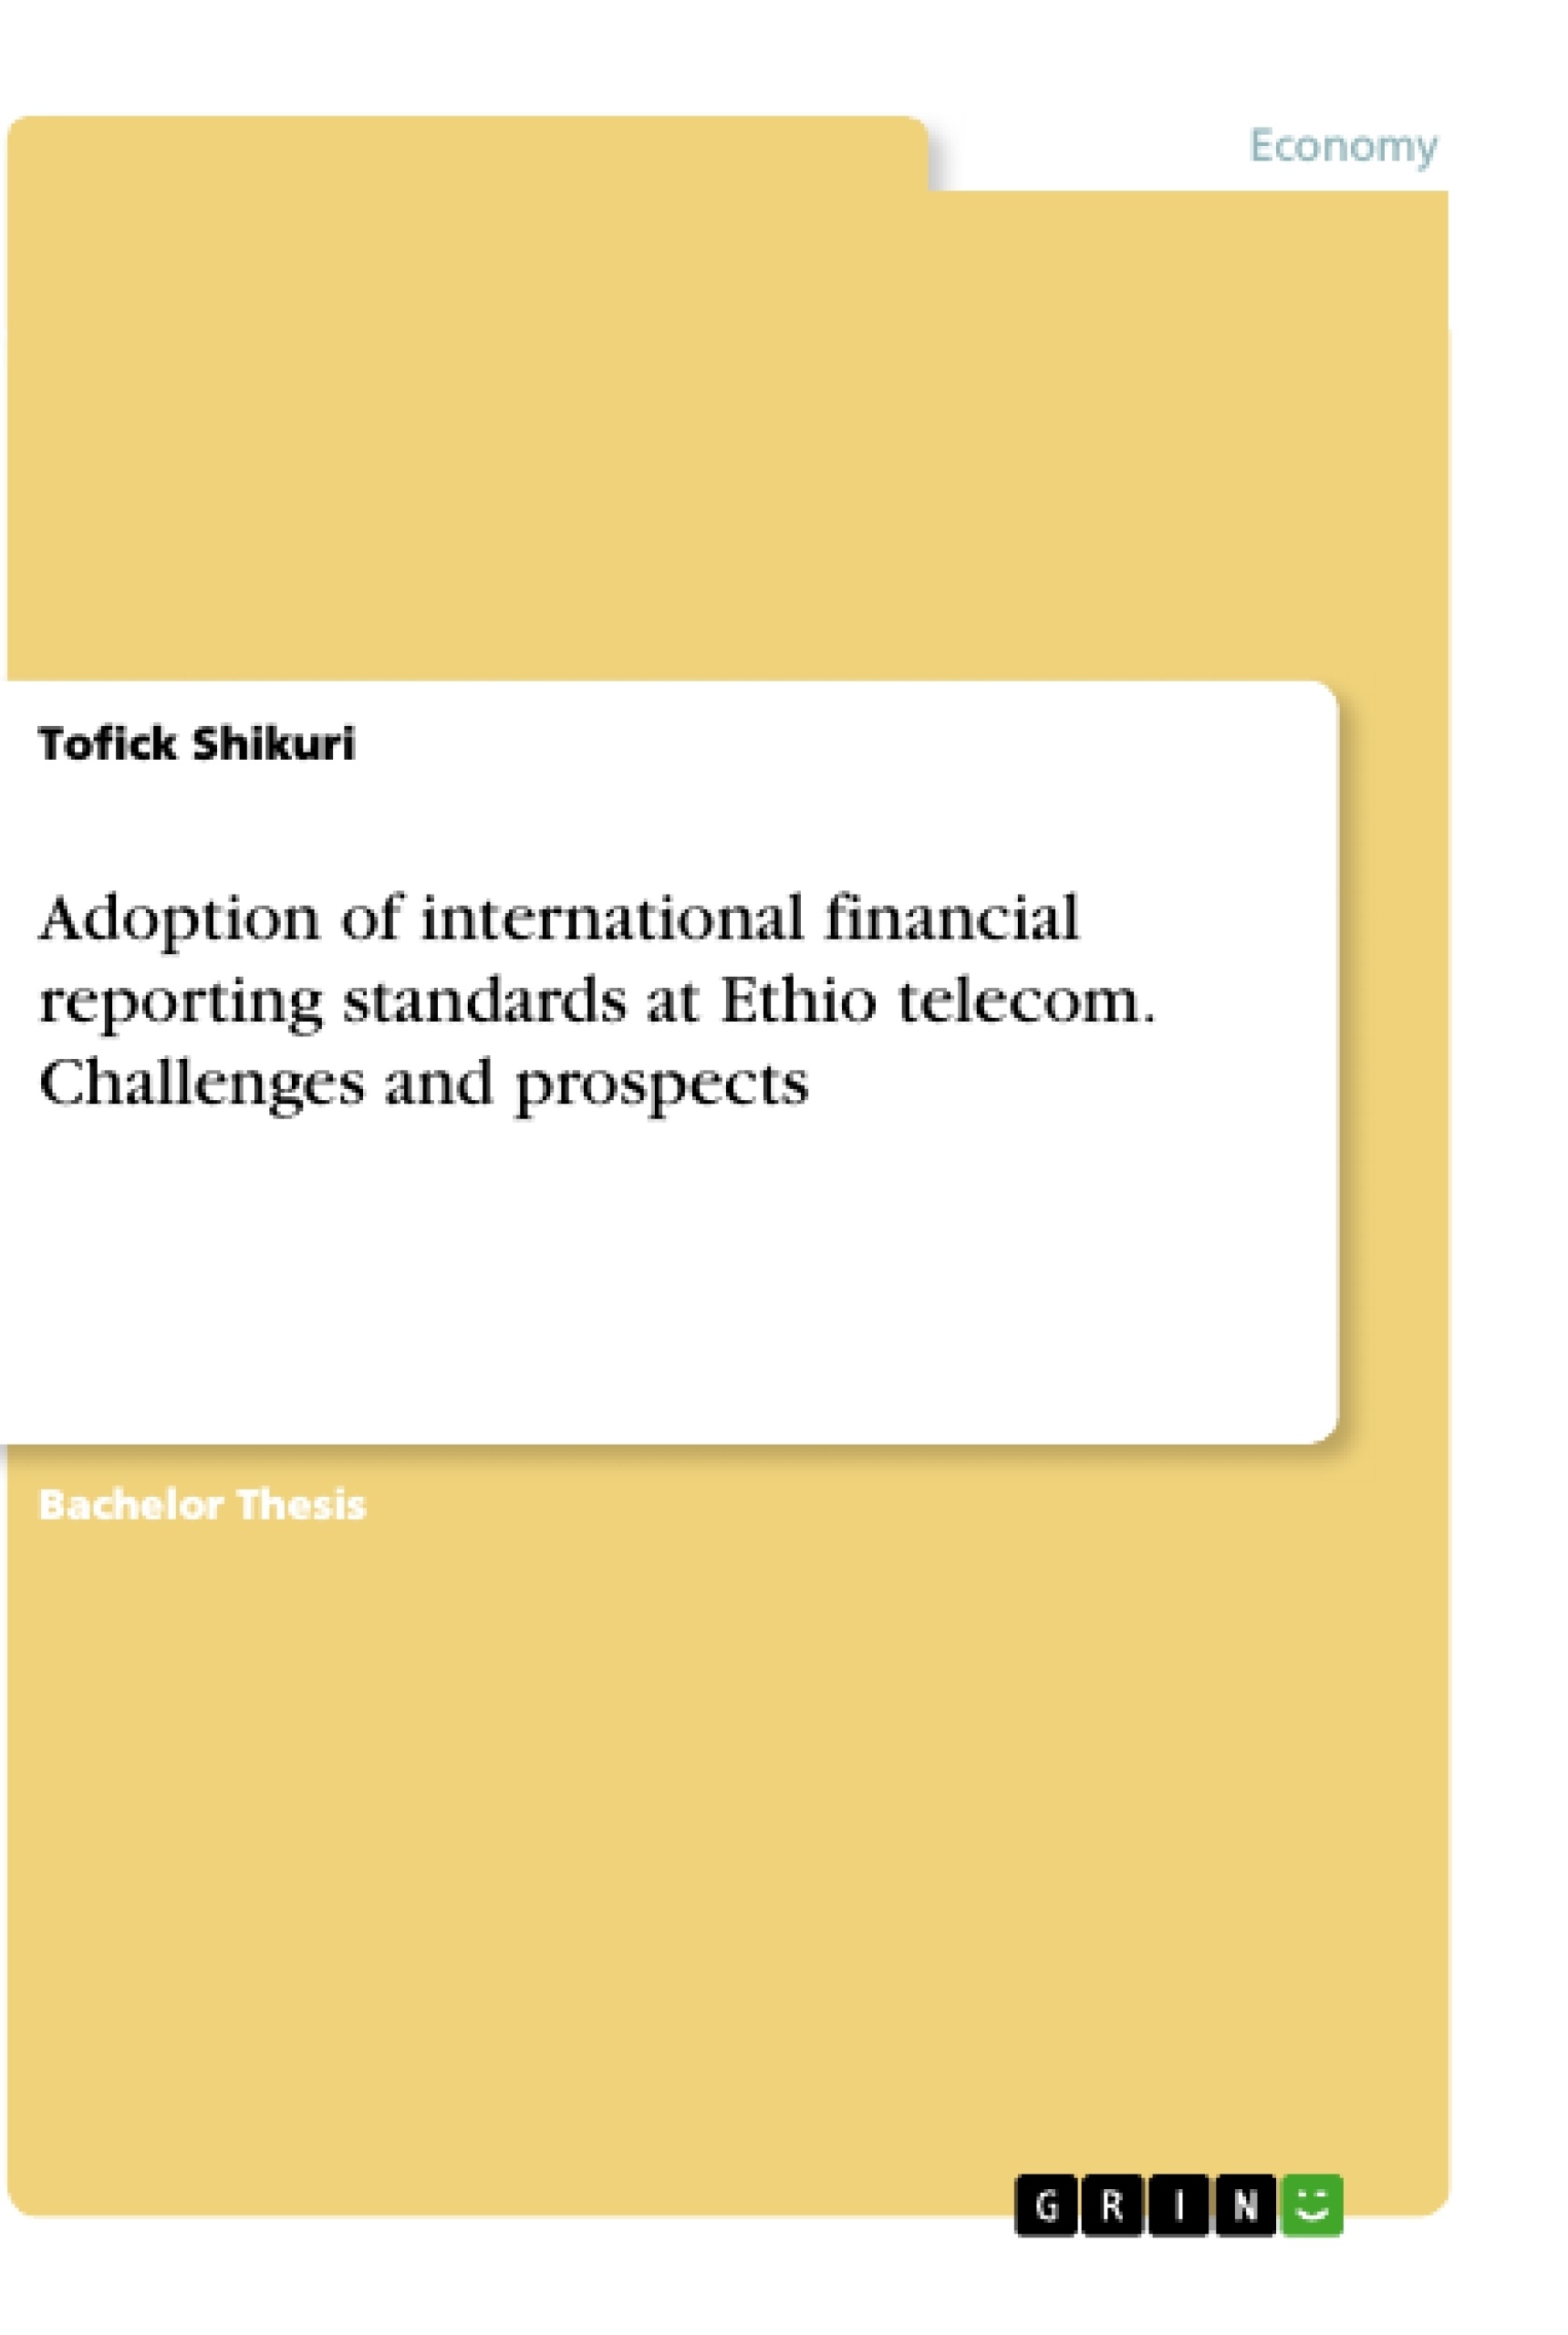 Título: Adoption of international financial reporting standards at Ethio telecom. Challenges and prospects